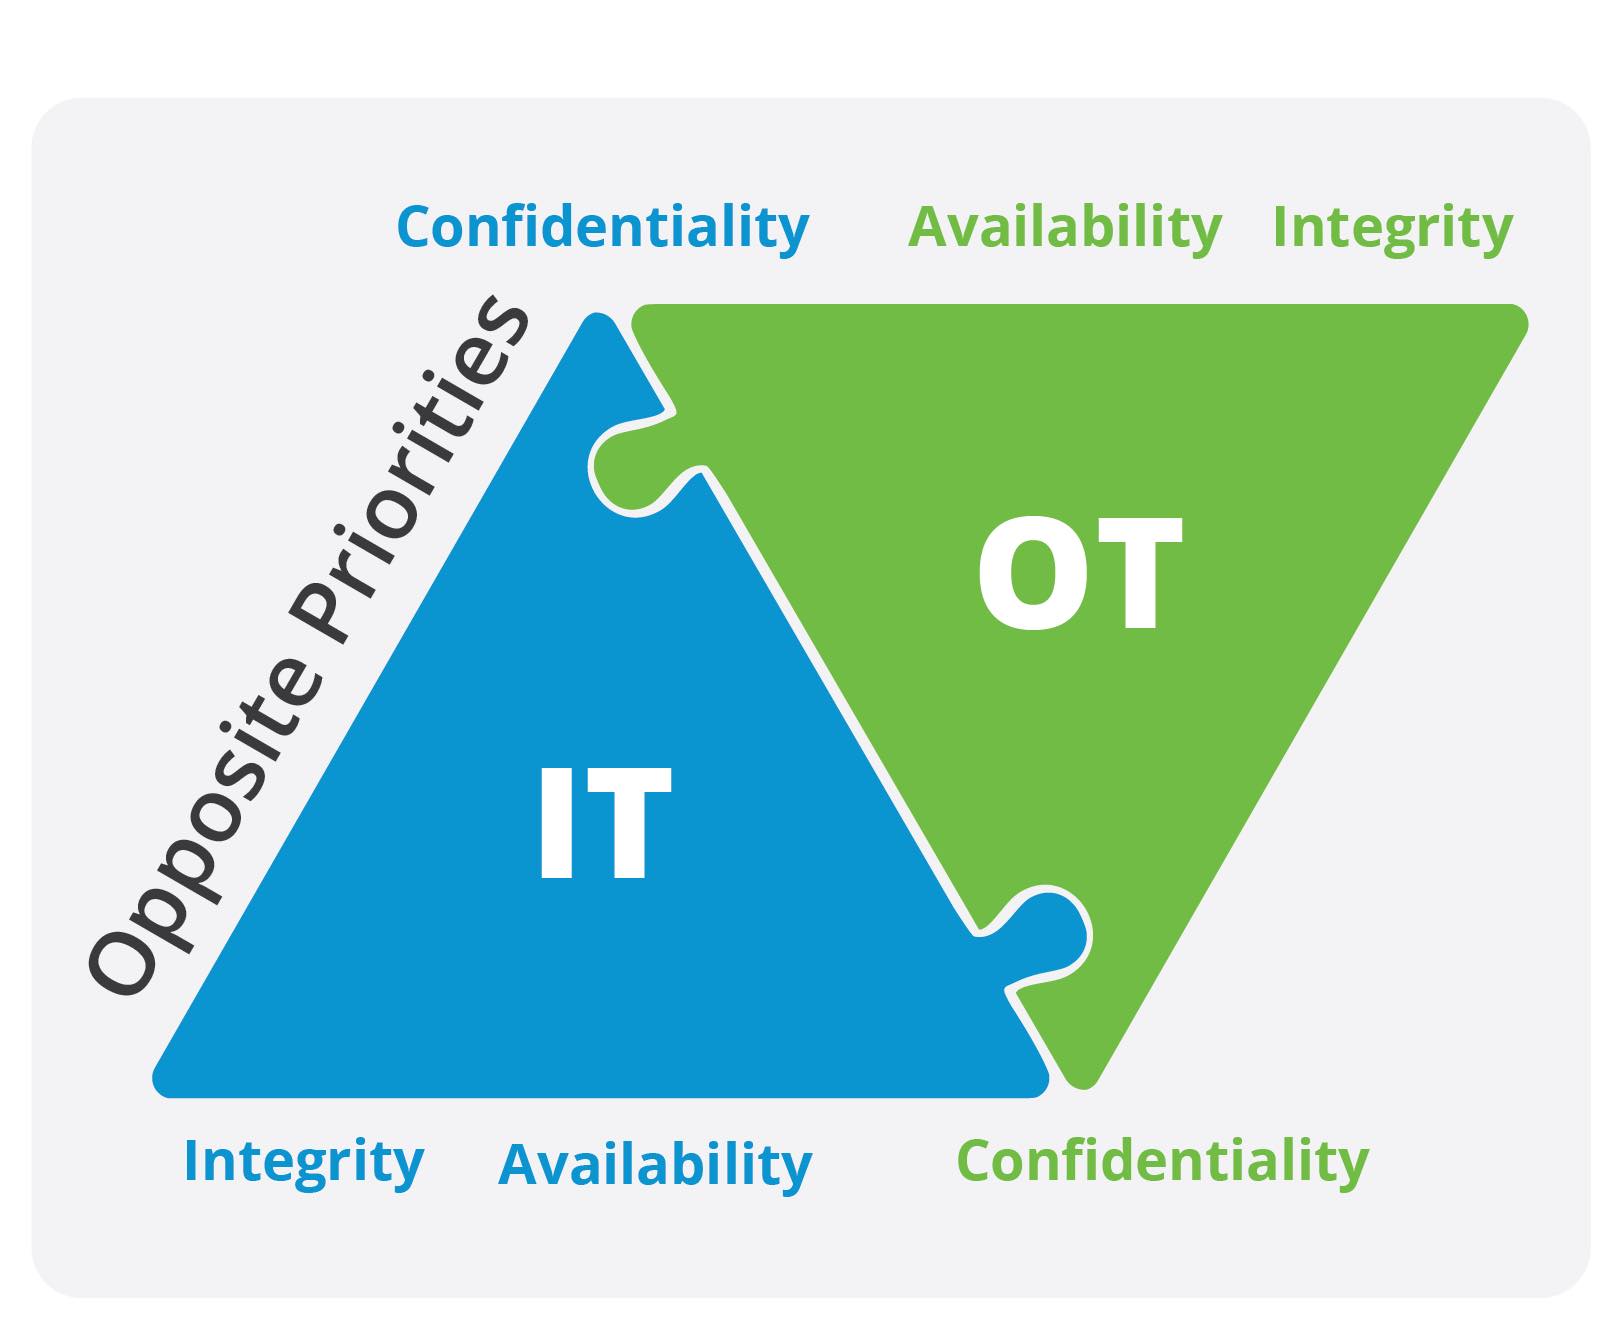 Figure 4: The confidentiality-integrity-availability triad is prioritized differently for IT and OT systems. IT values confidentiality and integrity over availability, while OT demands availability and integrity over confidentiality. Courtesy: Tesco